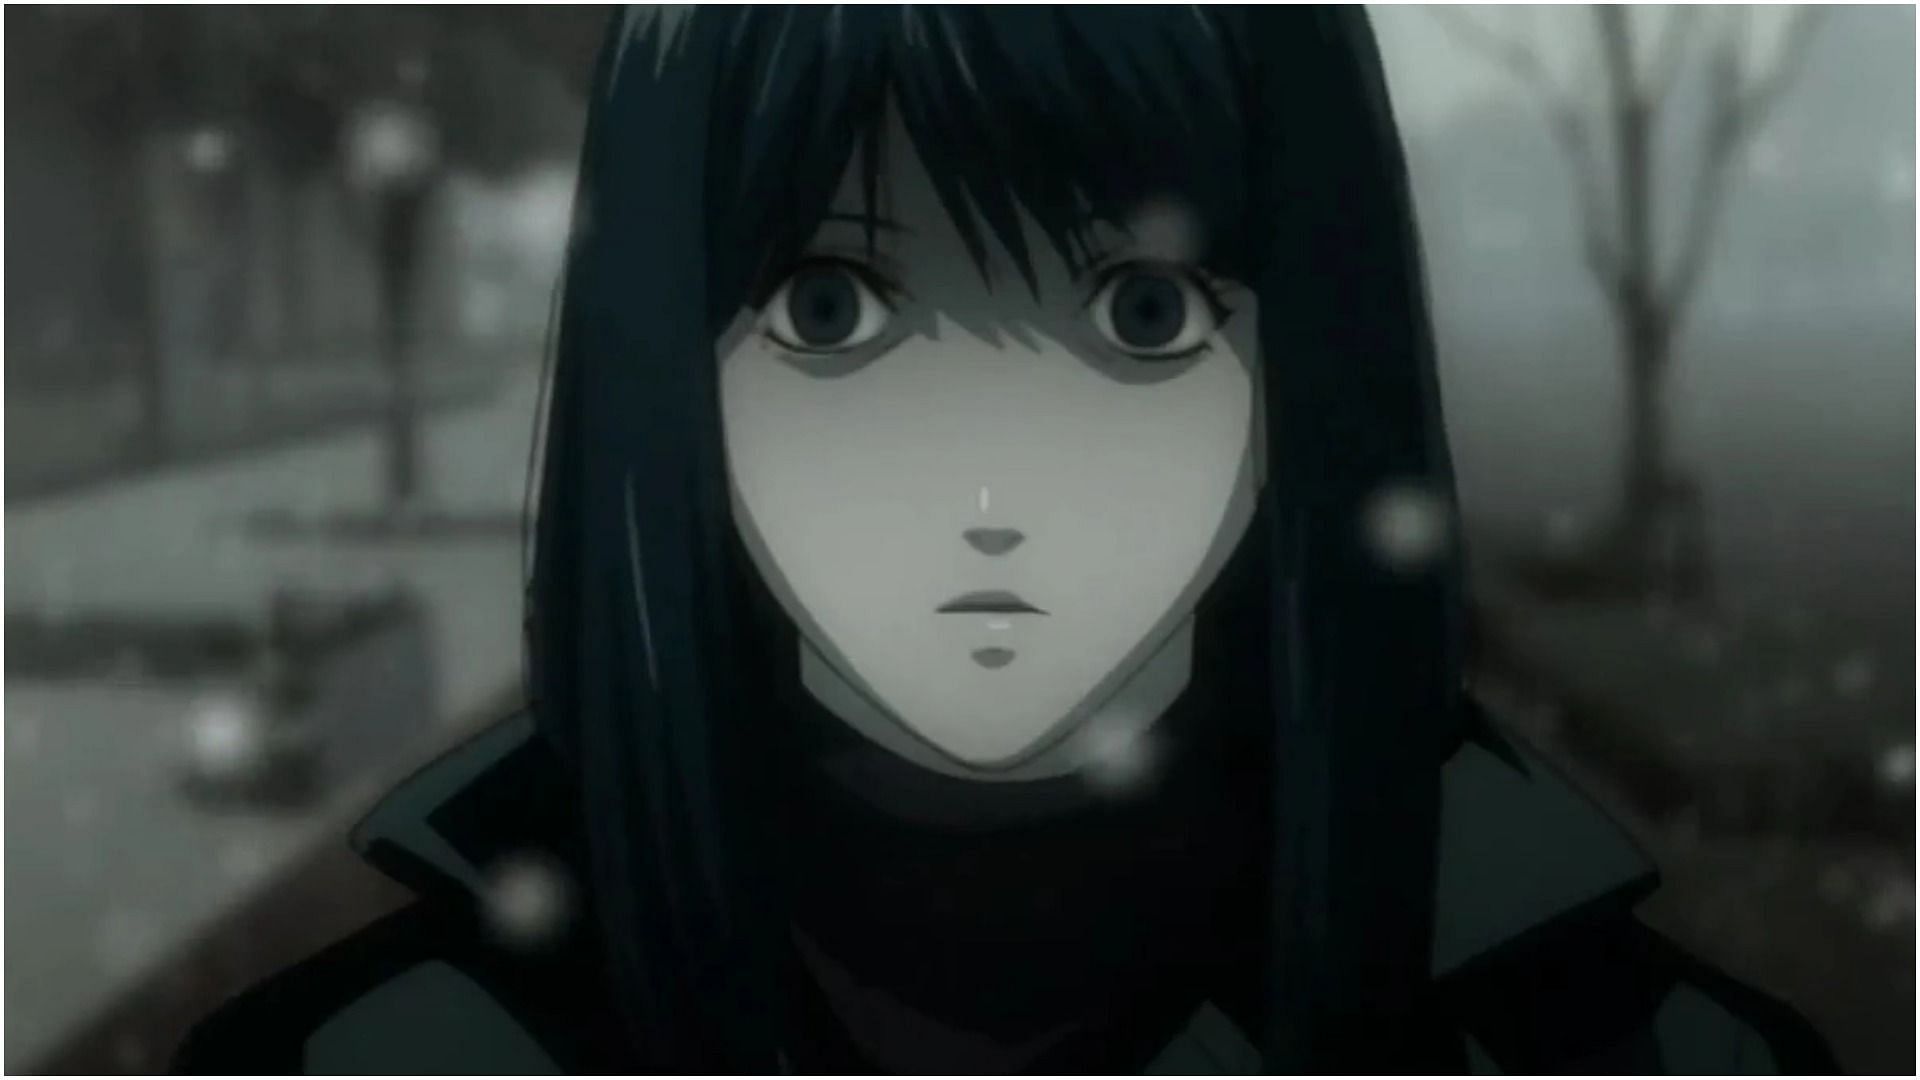 Naomi Misora as seen in Death Note (Image via Madhouse)